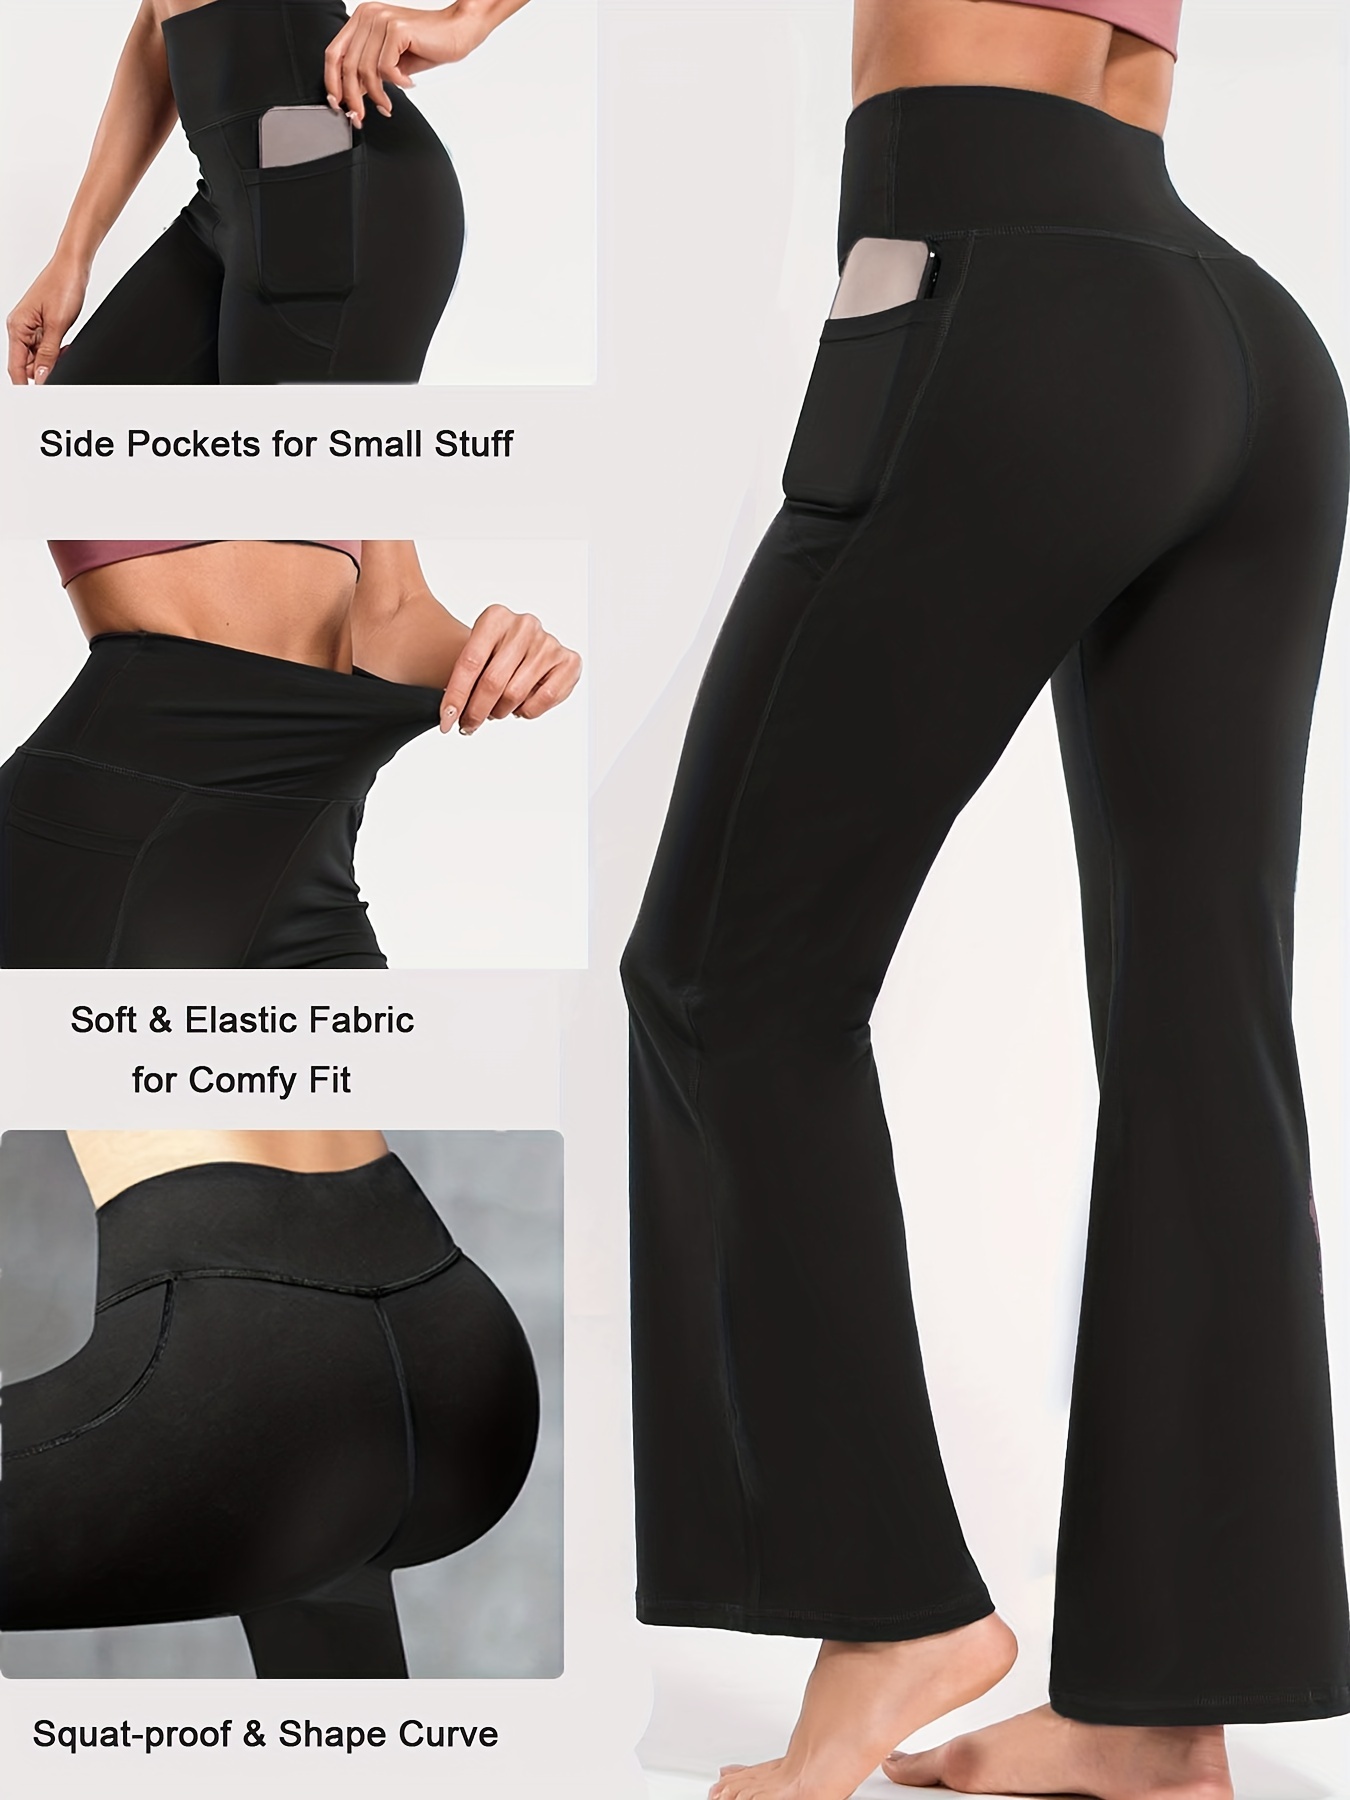 These flare leggings fit snugly on my body and give tummy control wher